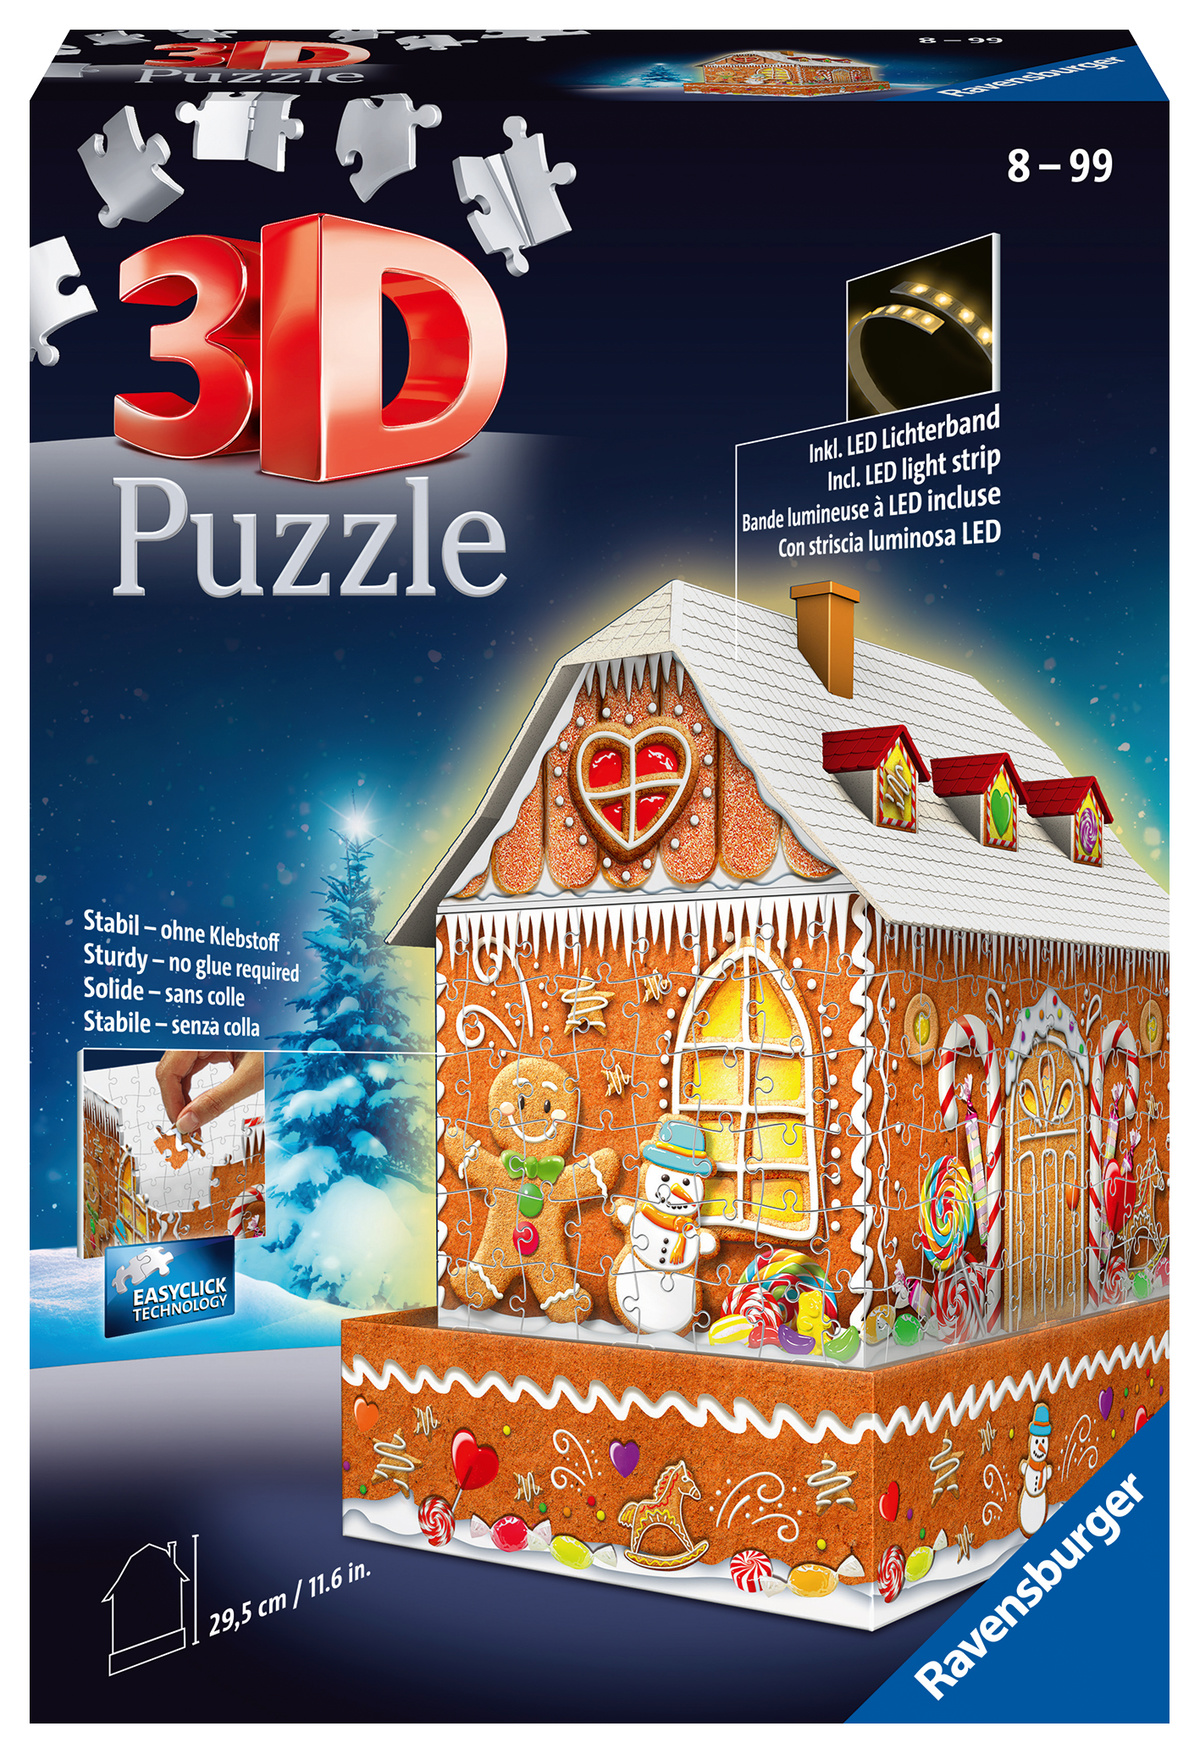 Induceren module Intentie Buying cheap 3D-Puzzles? Wide choice! - Puzzles123